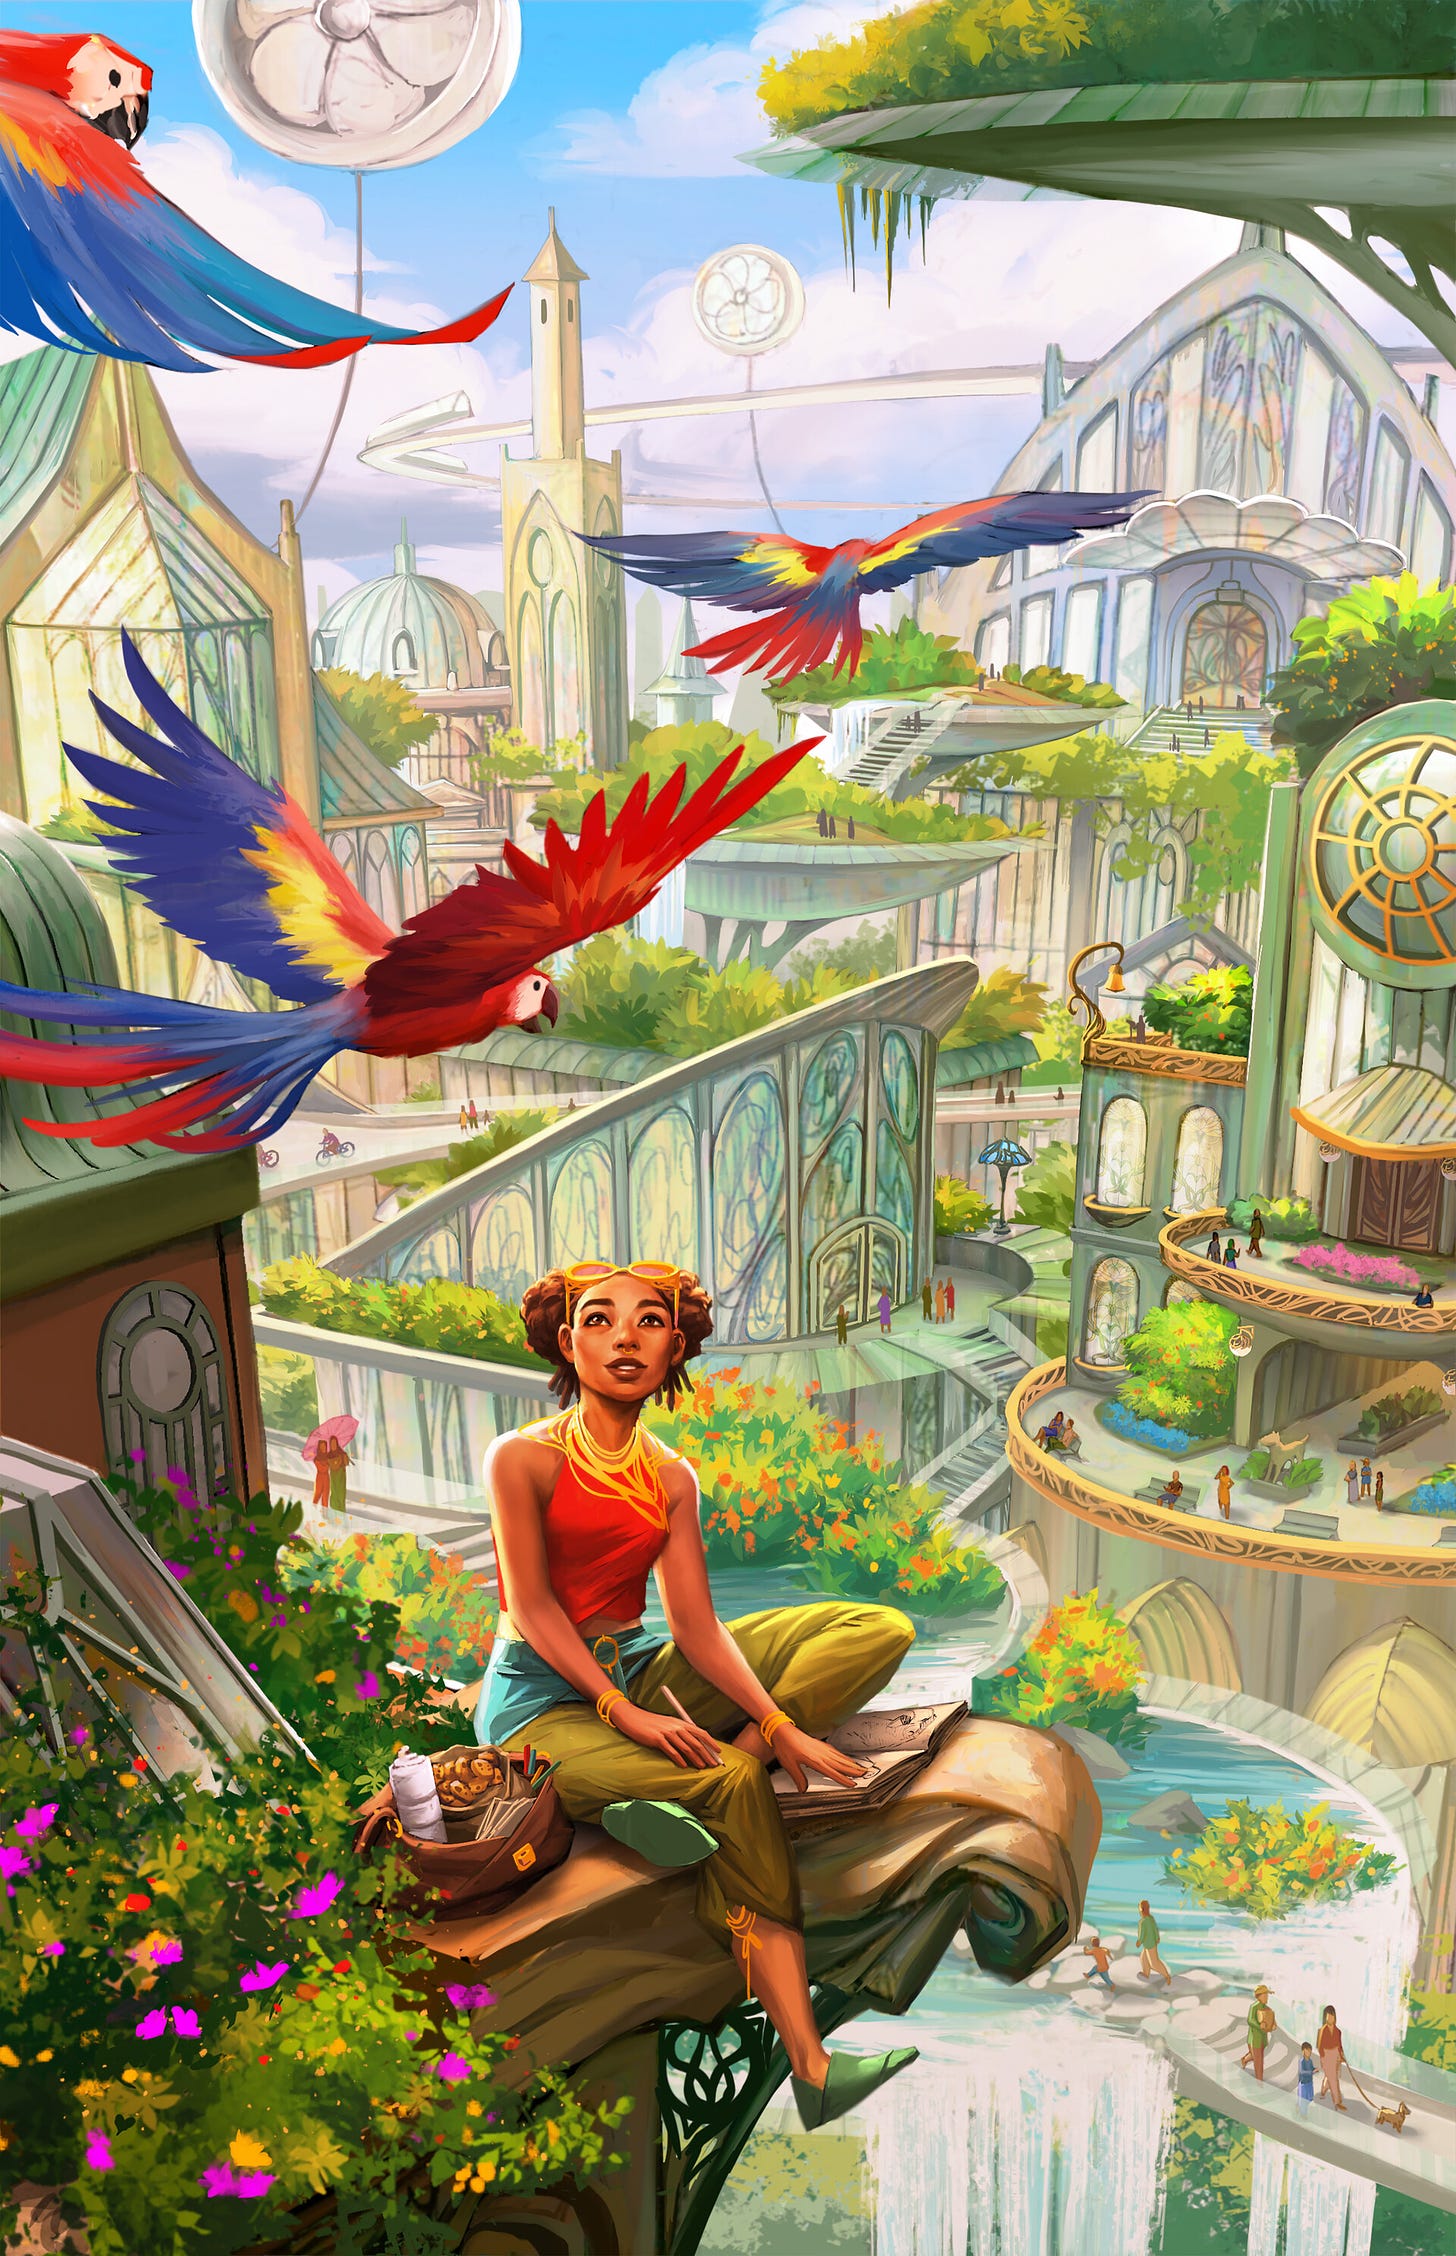 Woman sitting high above looking at parrots while surrounded by futuristic architechture and nature.